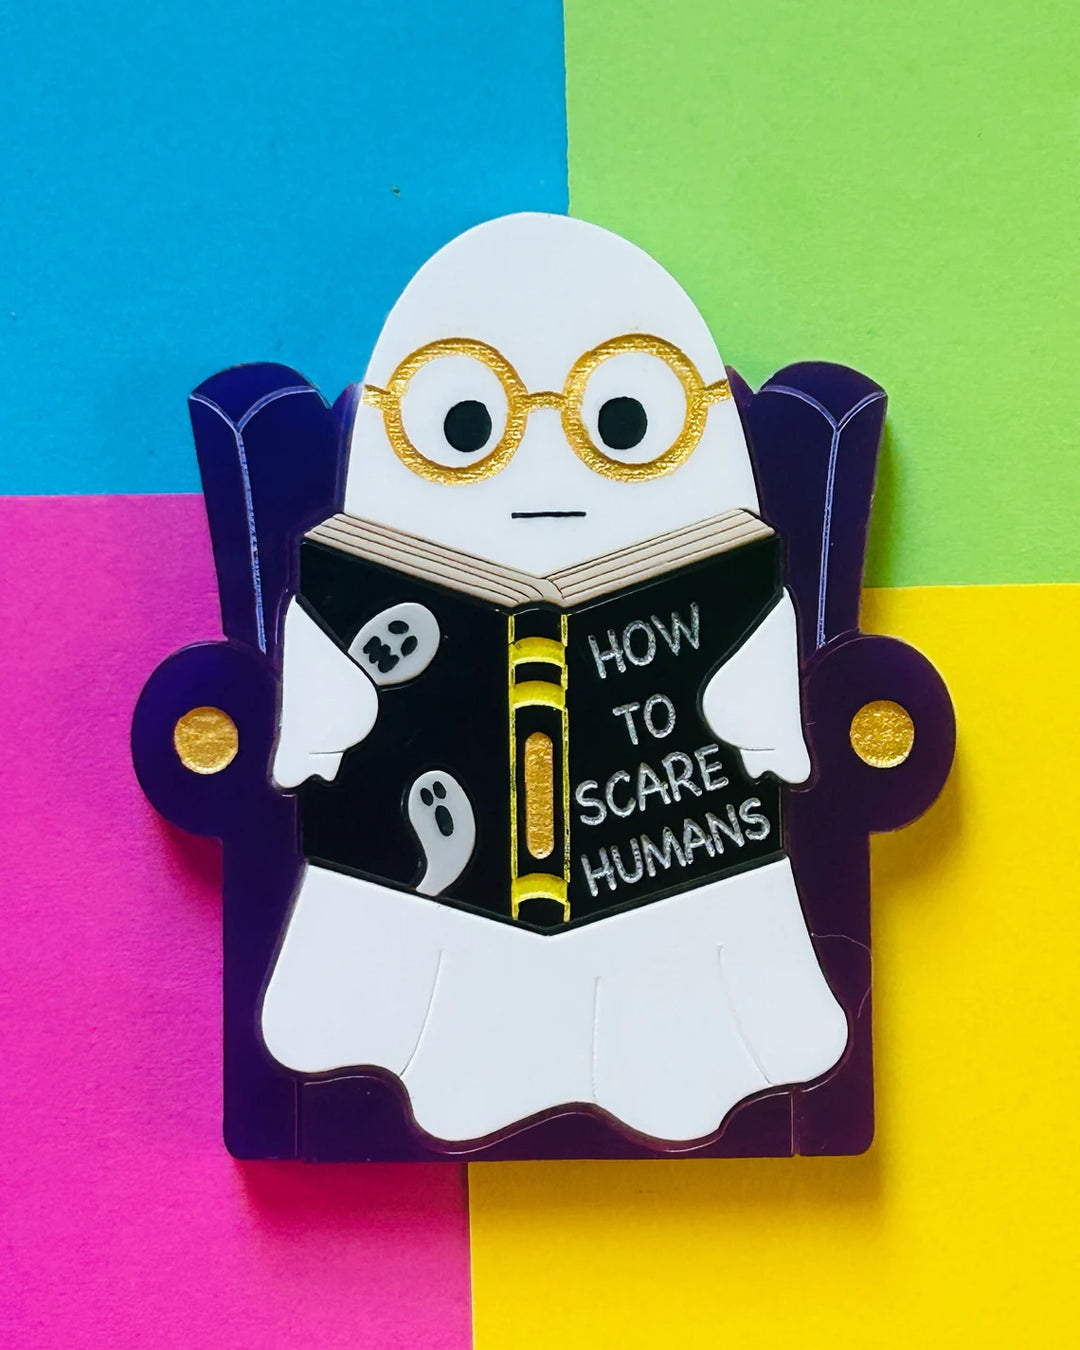 How to Scare Humans Acrylic Brooch by Makokot Design